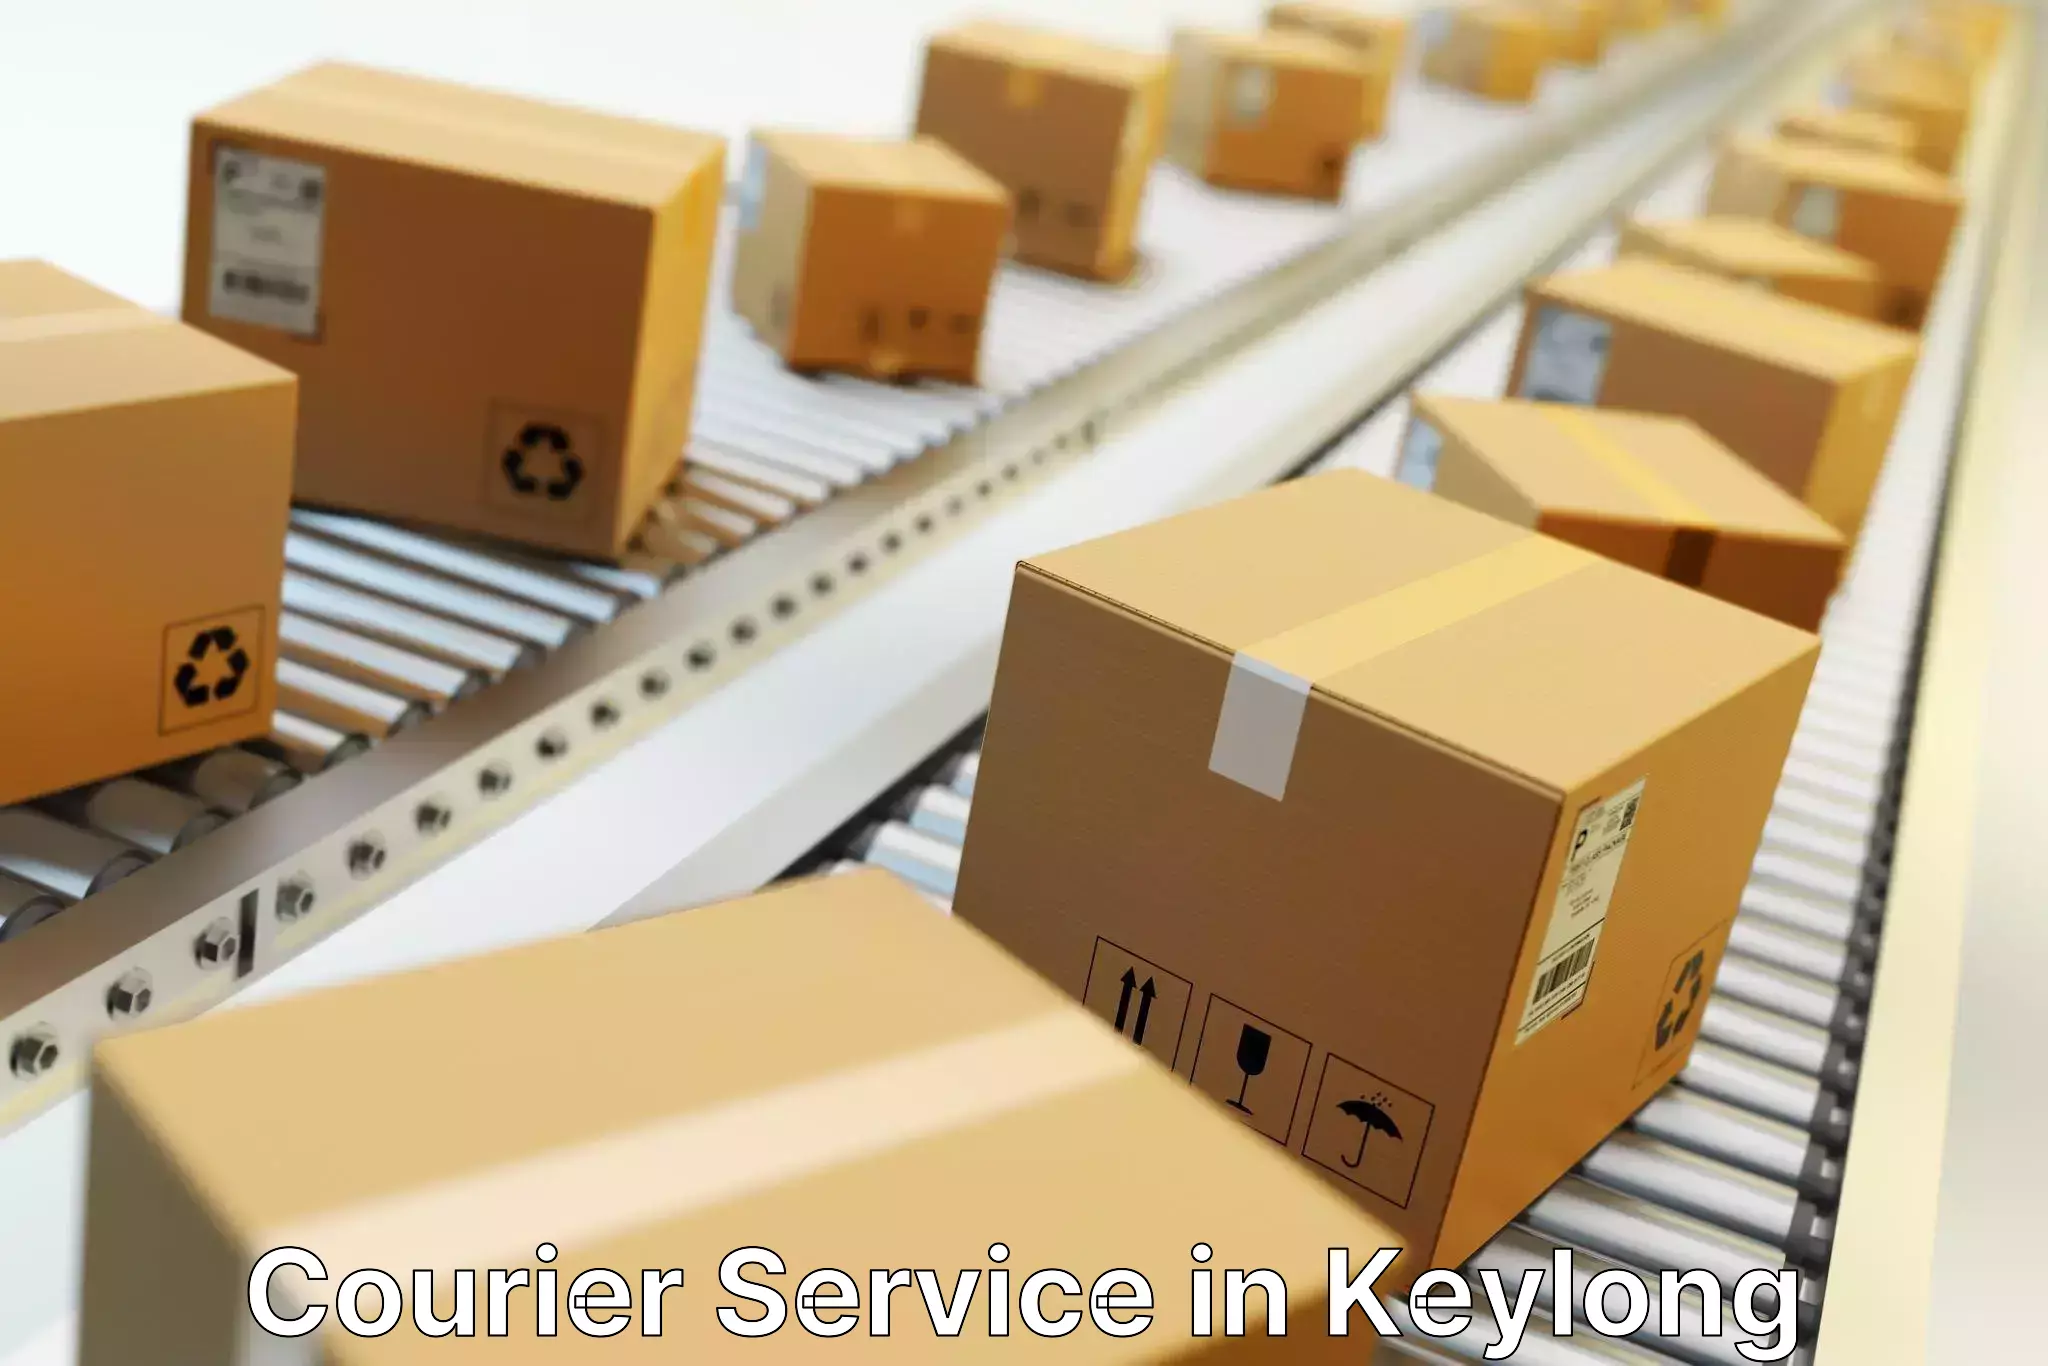 Small parcel delivery in Keylong